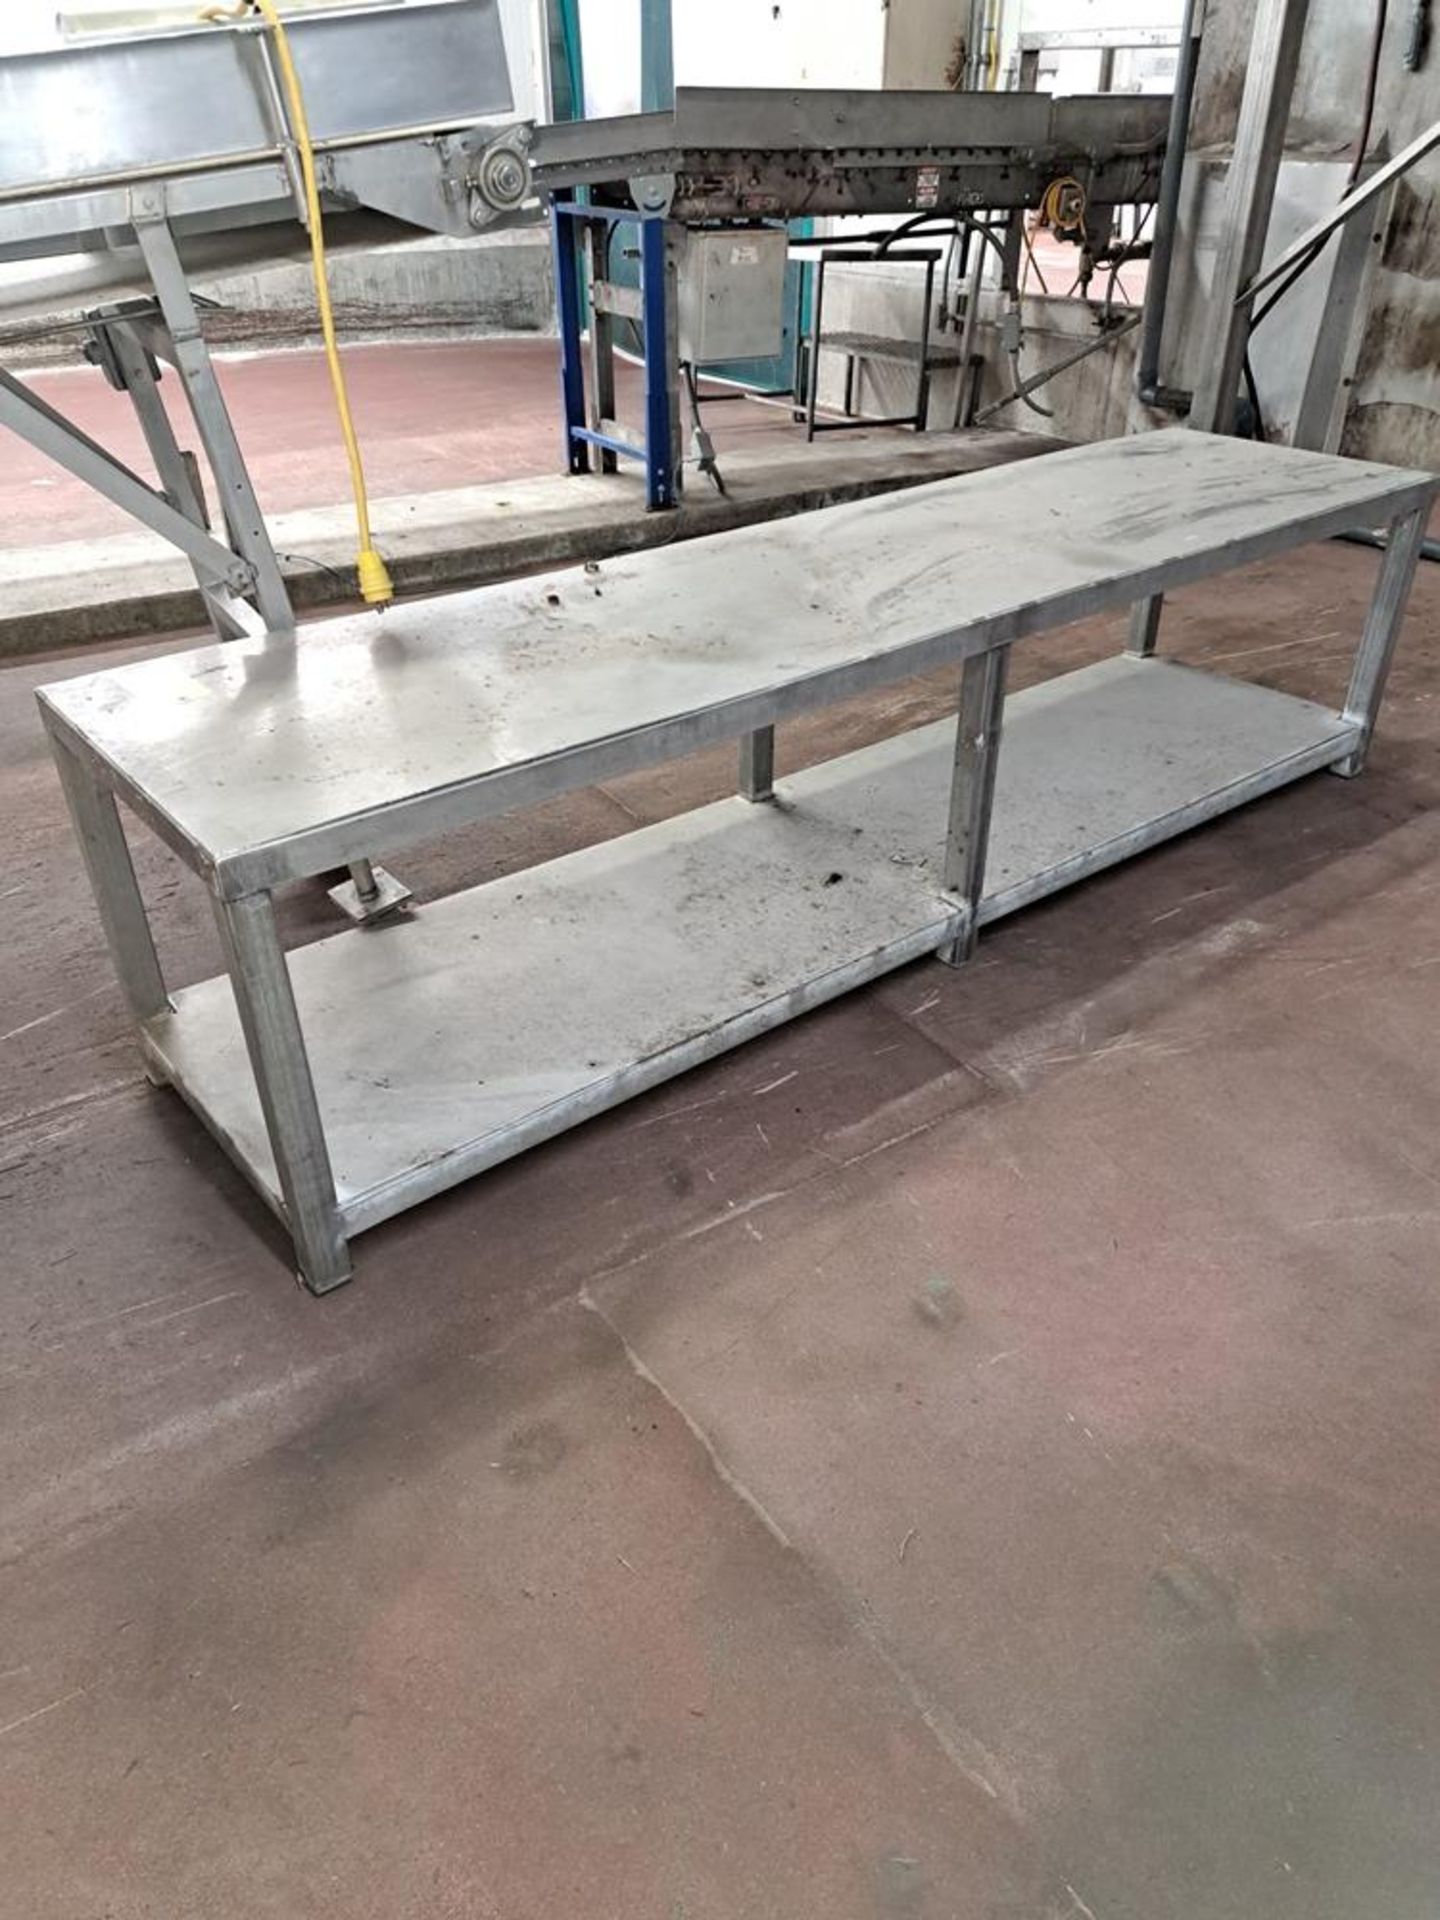 Stainless Steel Table, 24" W X 8' L X 30" T: Required Loading Fee $75.00, Rigger-Norm Pavlish,